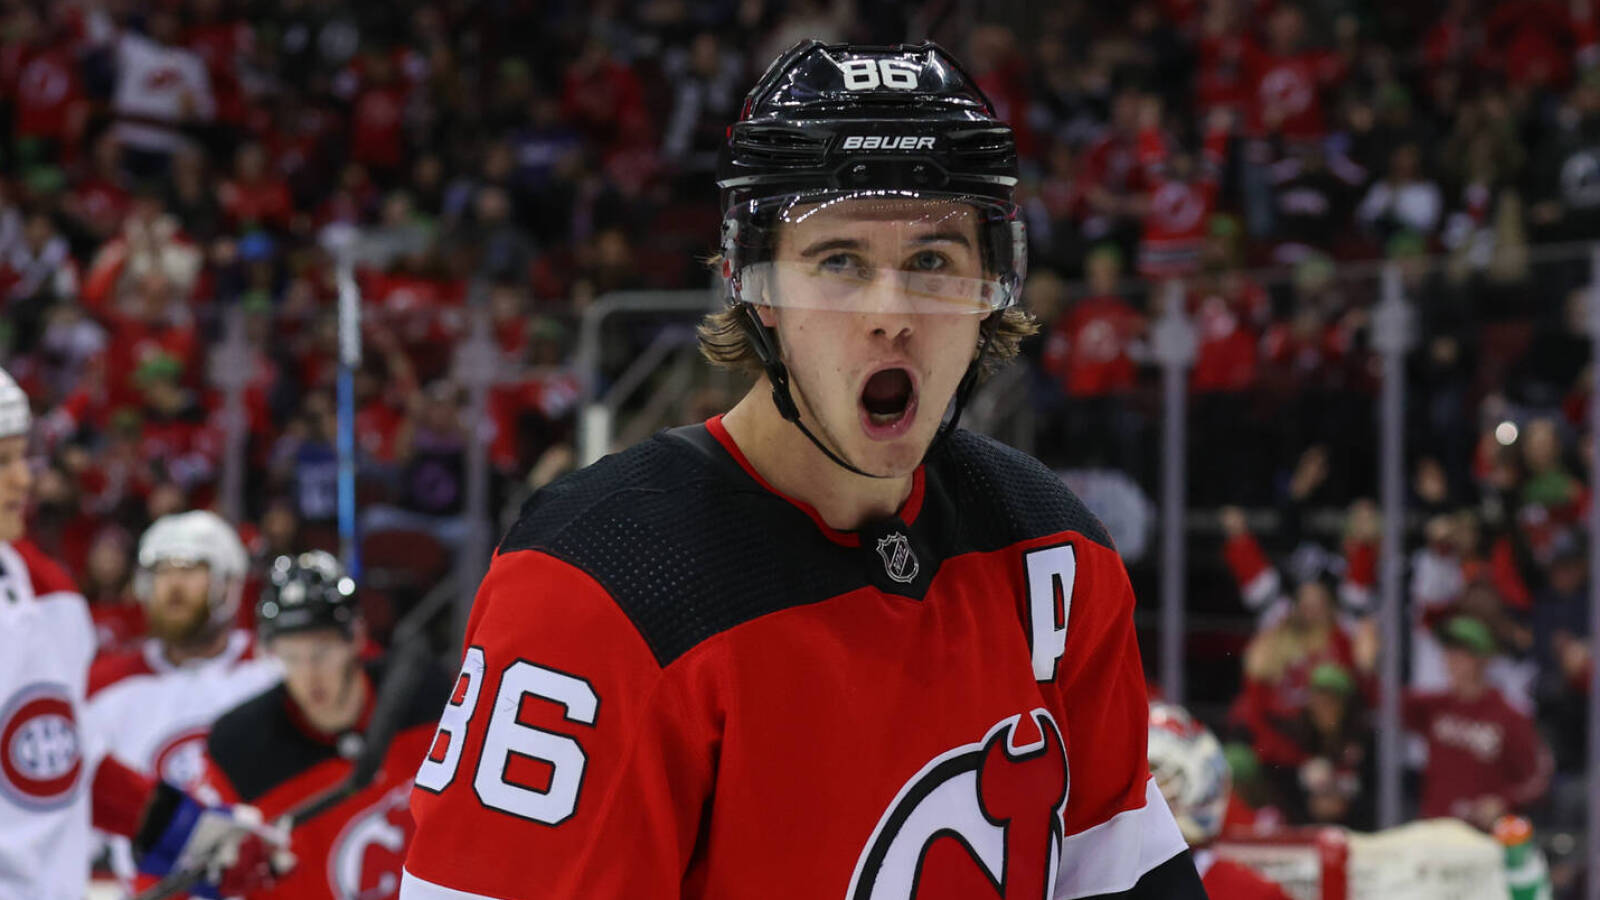 Devils' Jack Hughes to miss rest of season with knee injury